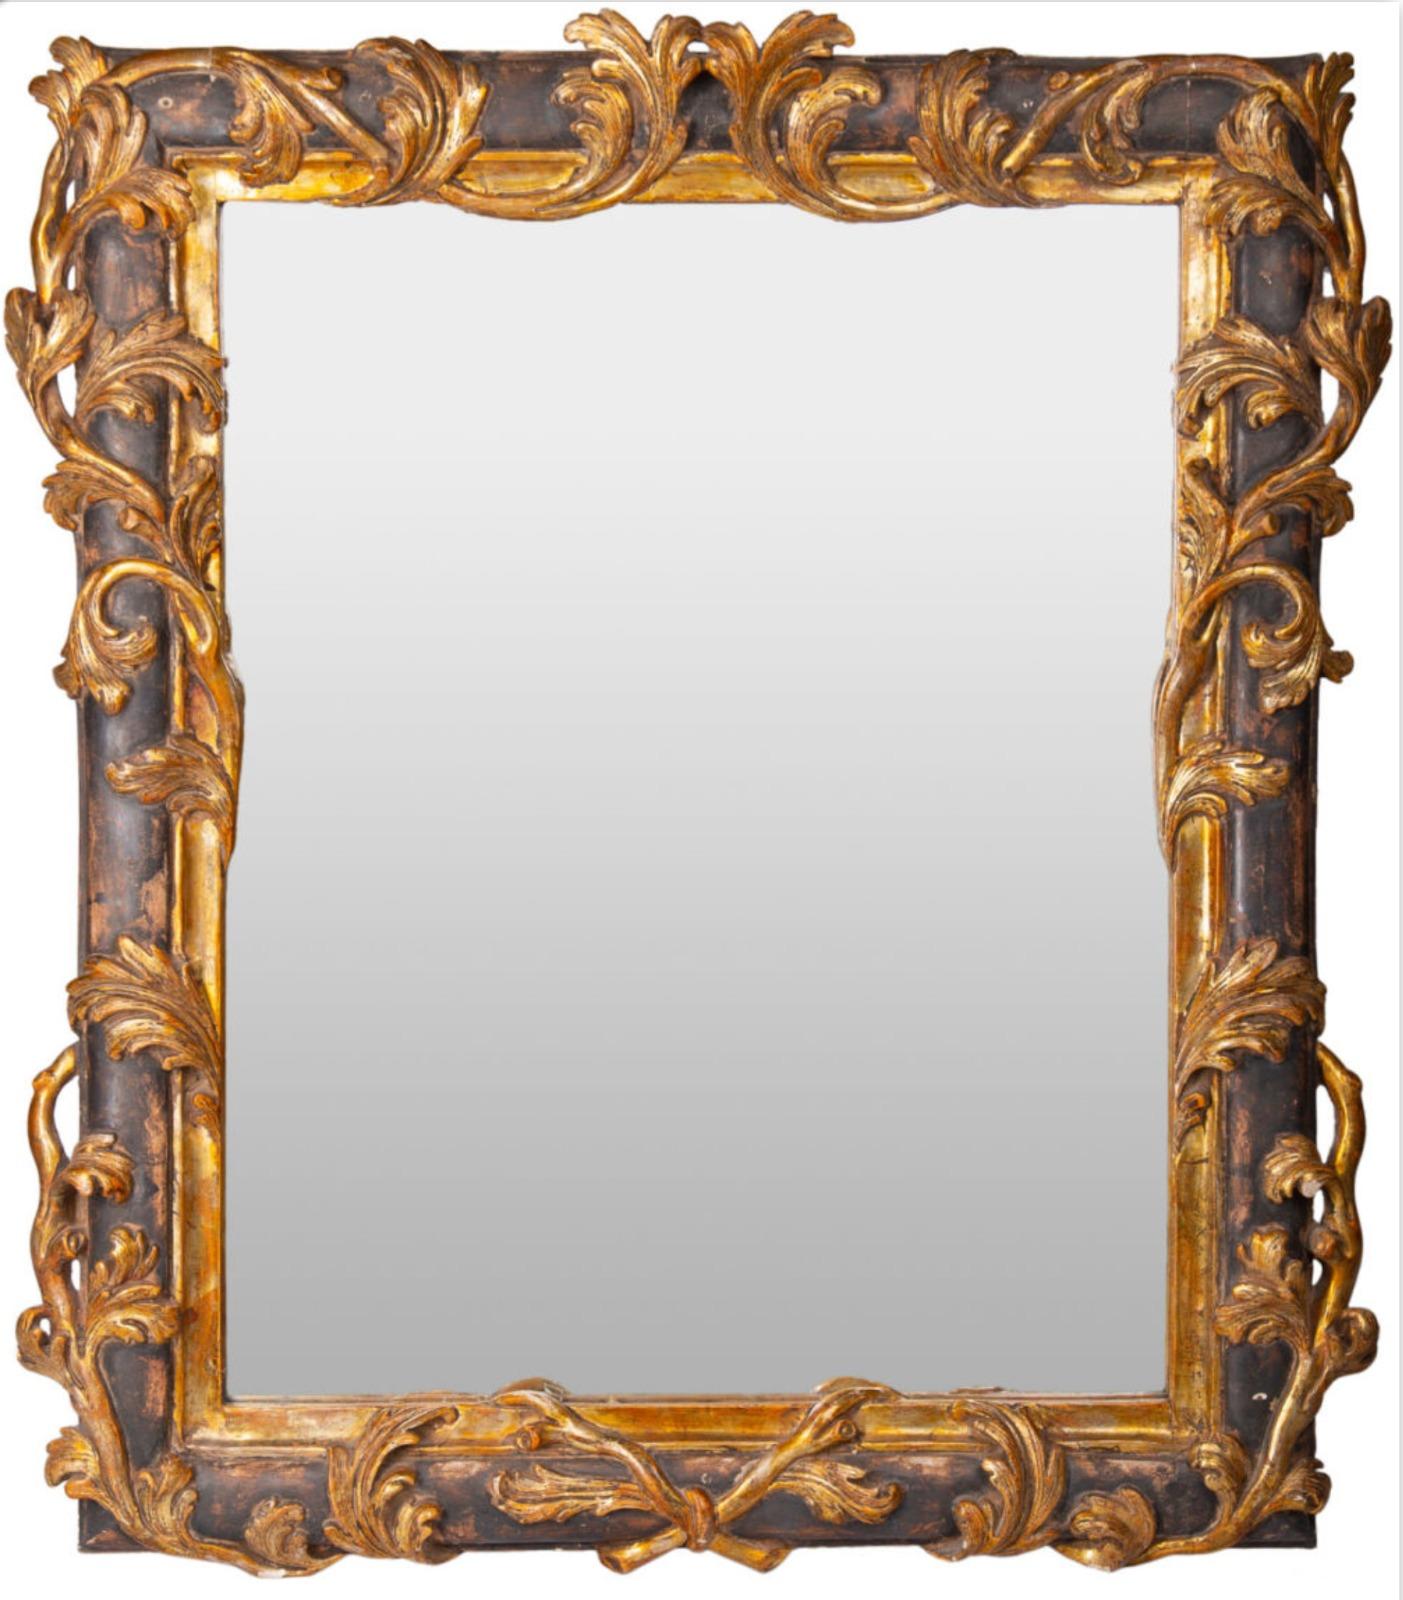 Hand-Crafted Florence MIRROR in Gilded and Silvered Wood Late 19th Century